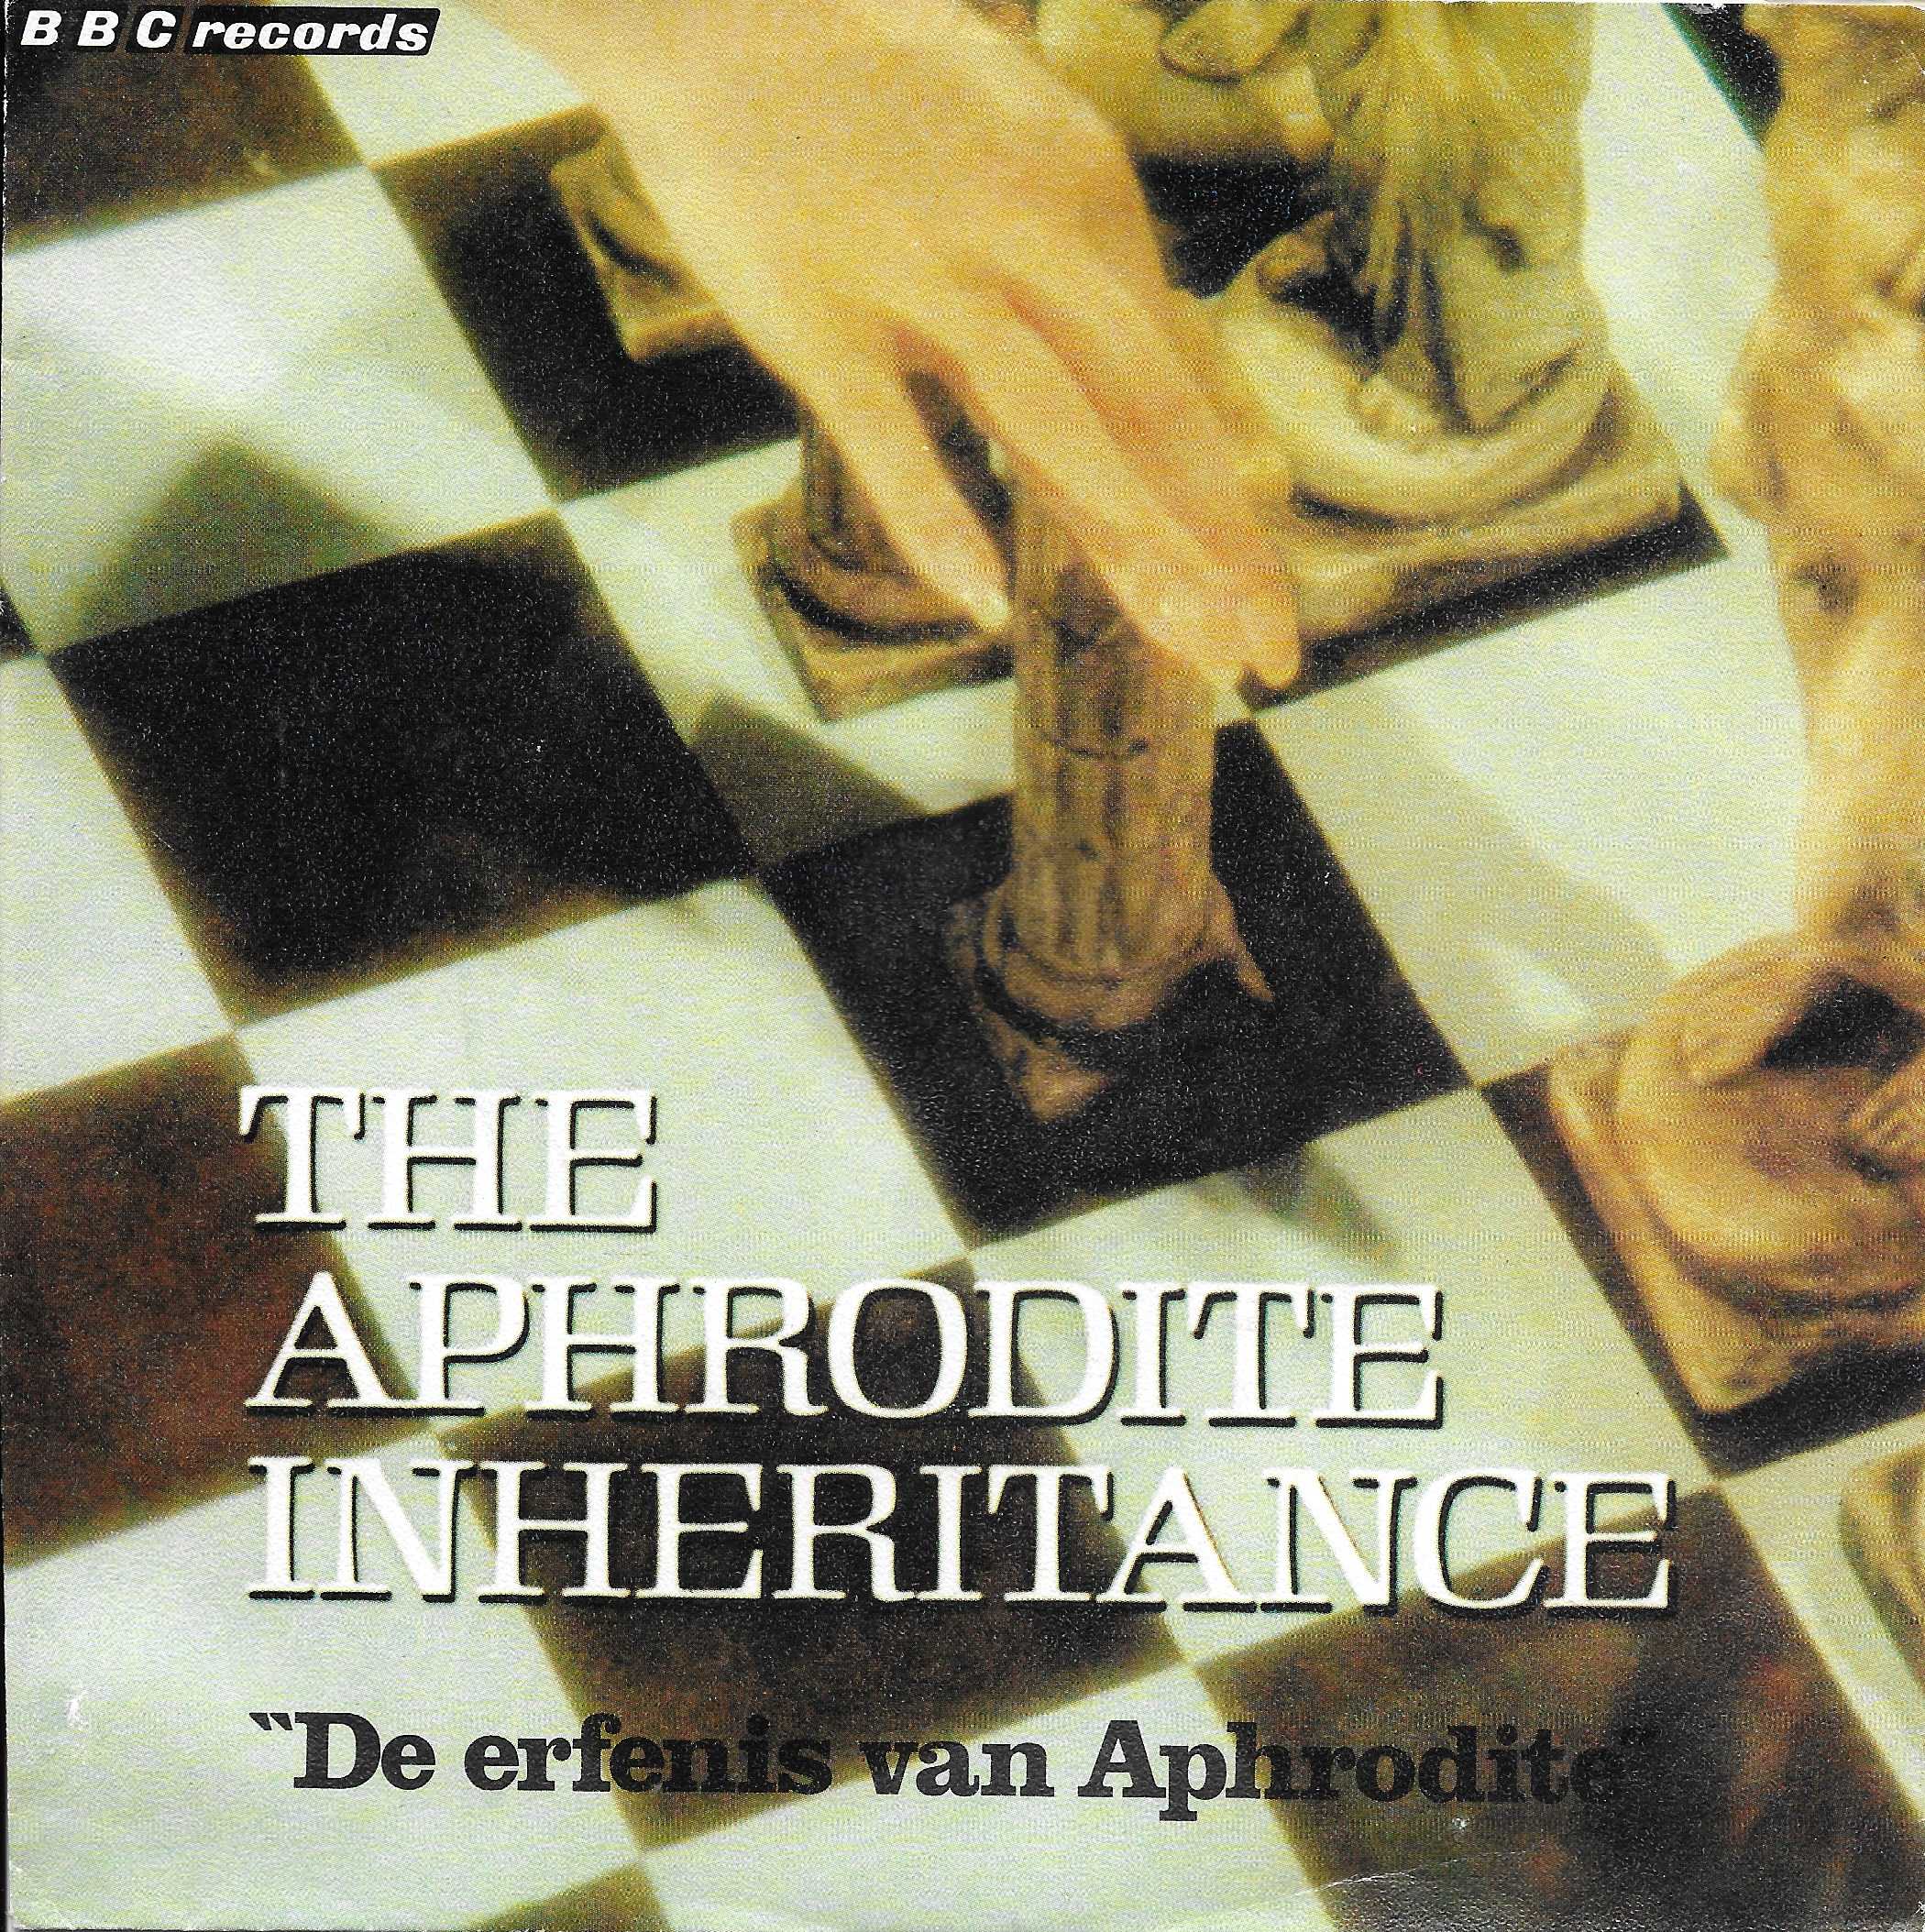 Picture of RESL 62-iD The Aphrodite inheritance (Dutch import) by artist George Kotsonis from the BBC singles - Records and Tapes library